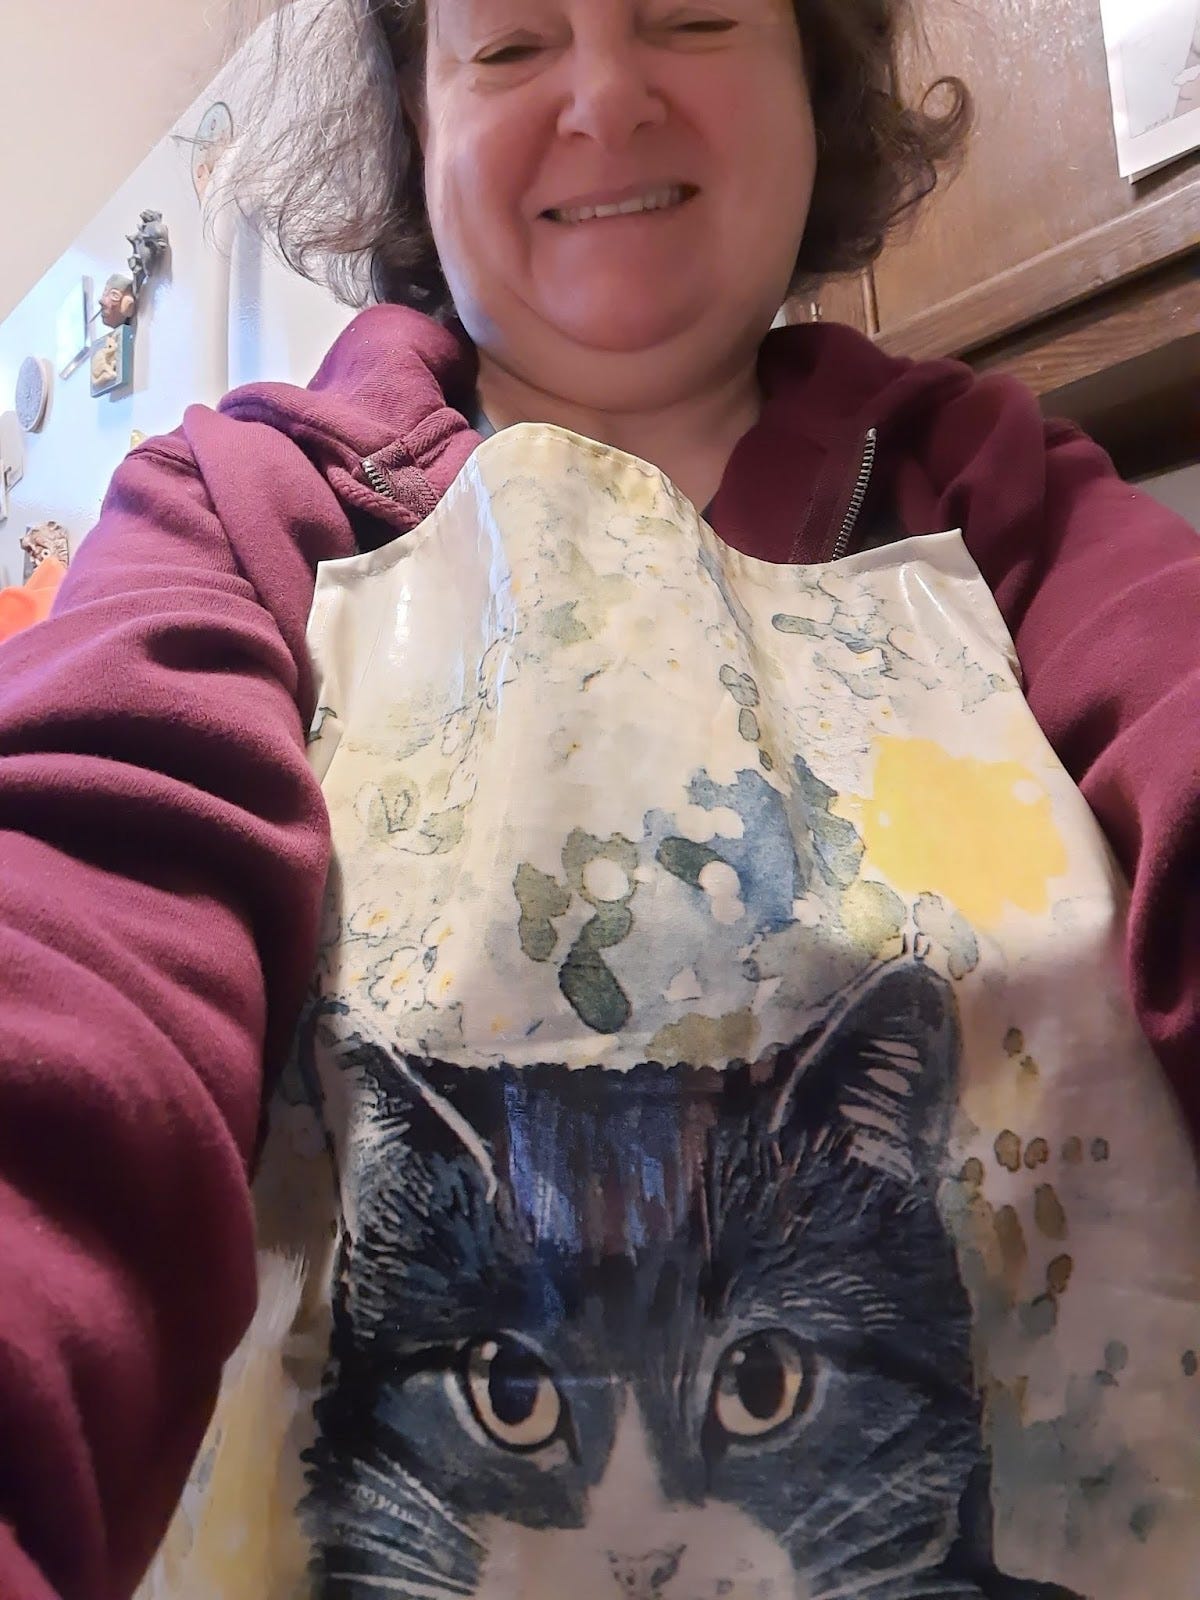 The author in her apron with a cat on it. The cat is black and white. The author is white with brown messy hair and is giggling because her arms were too short to take the photo she wanted to.